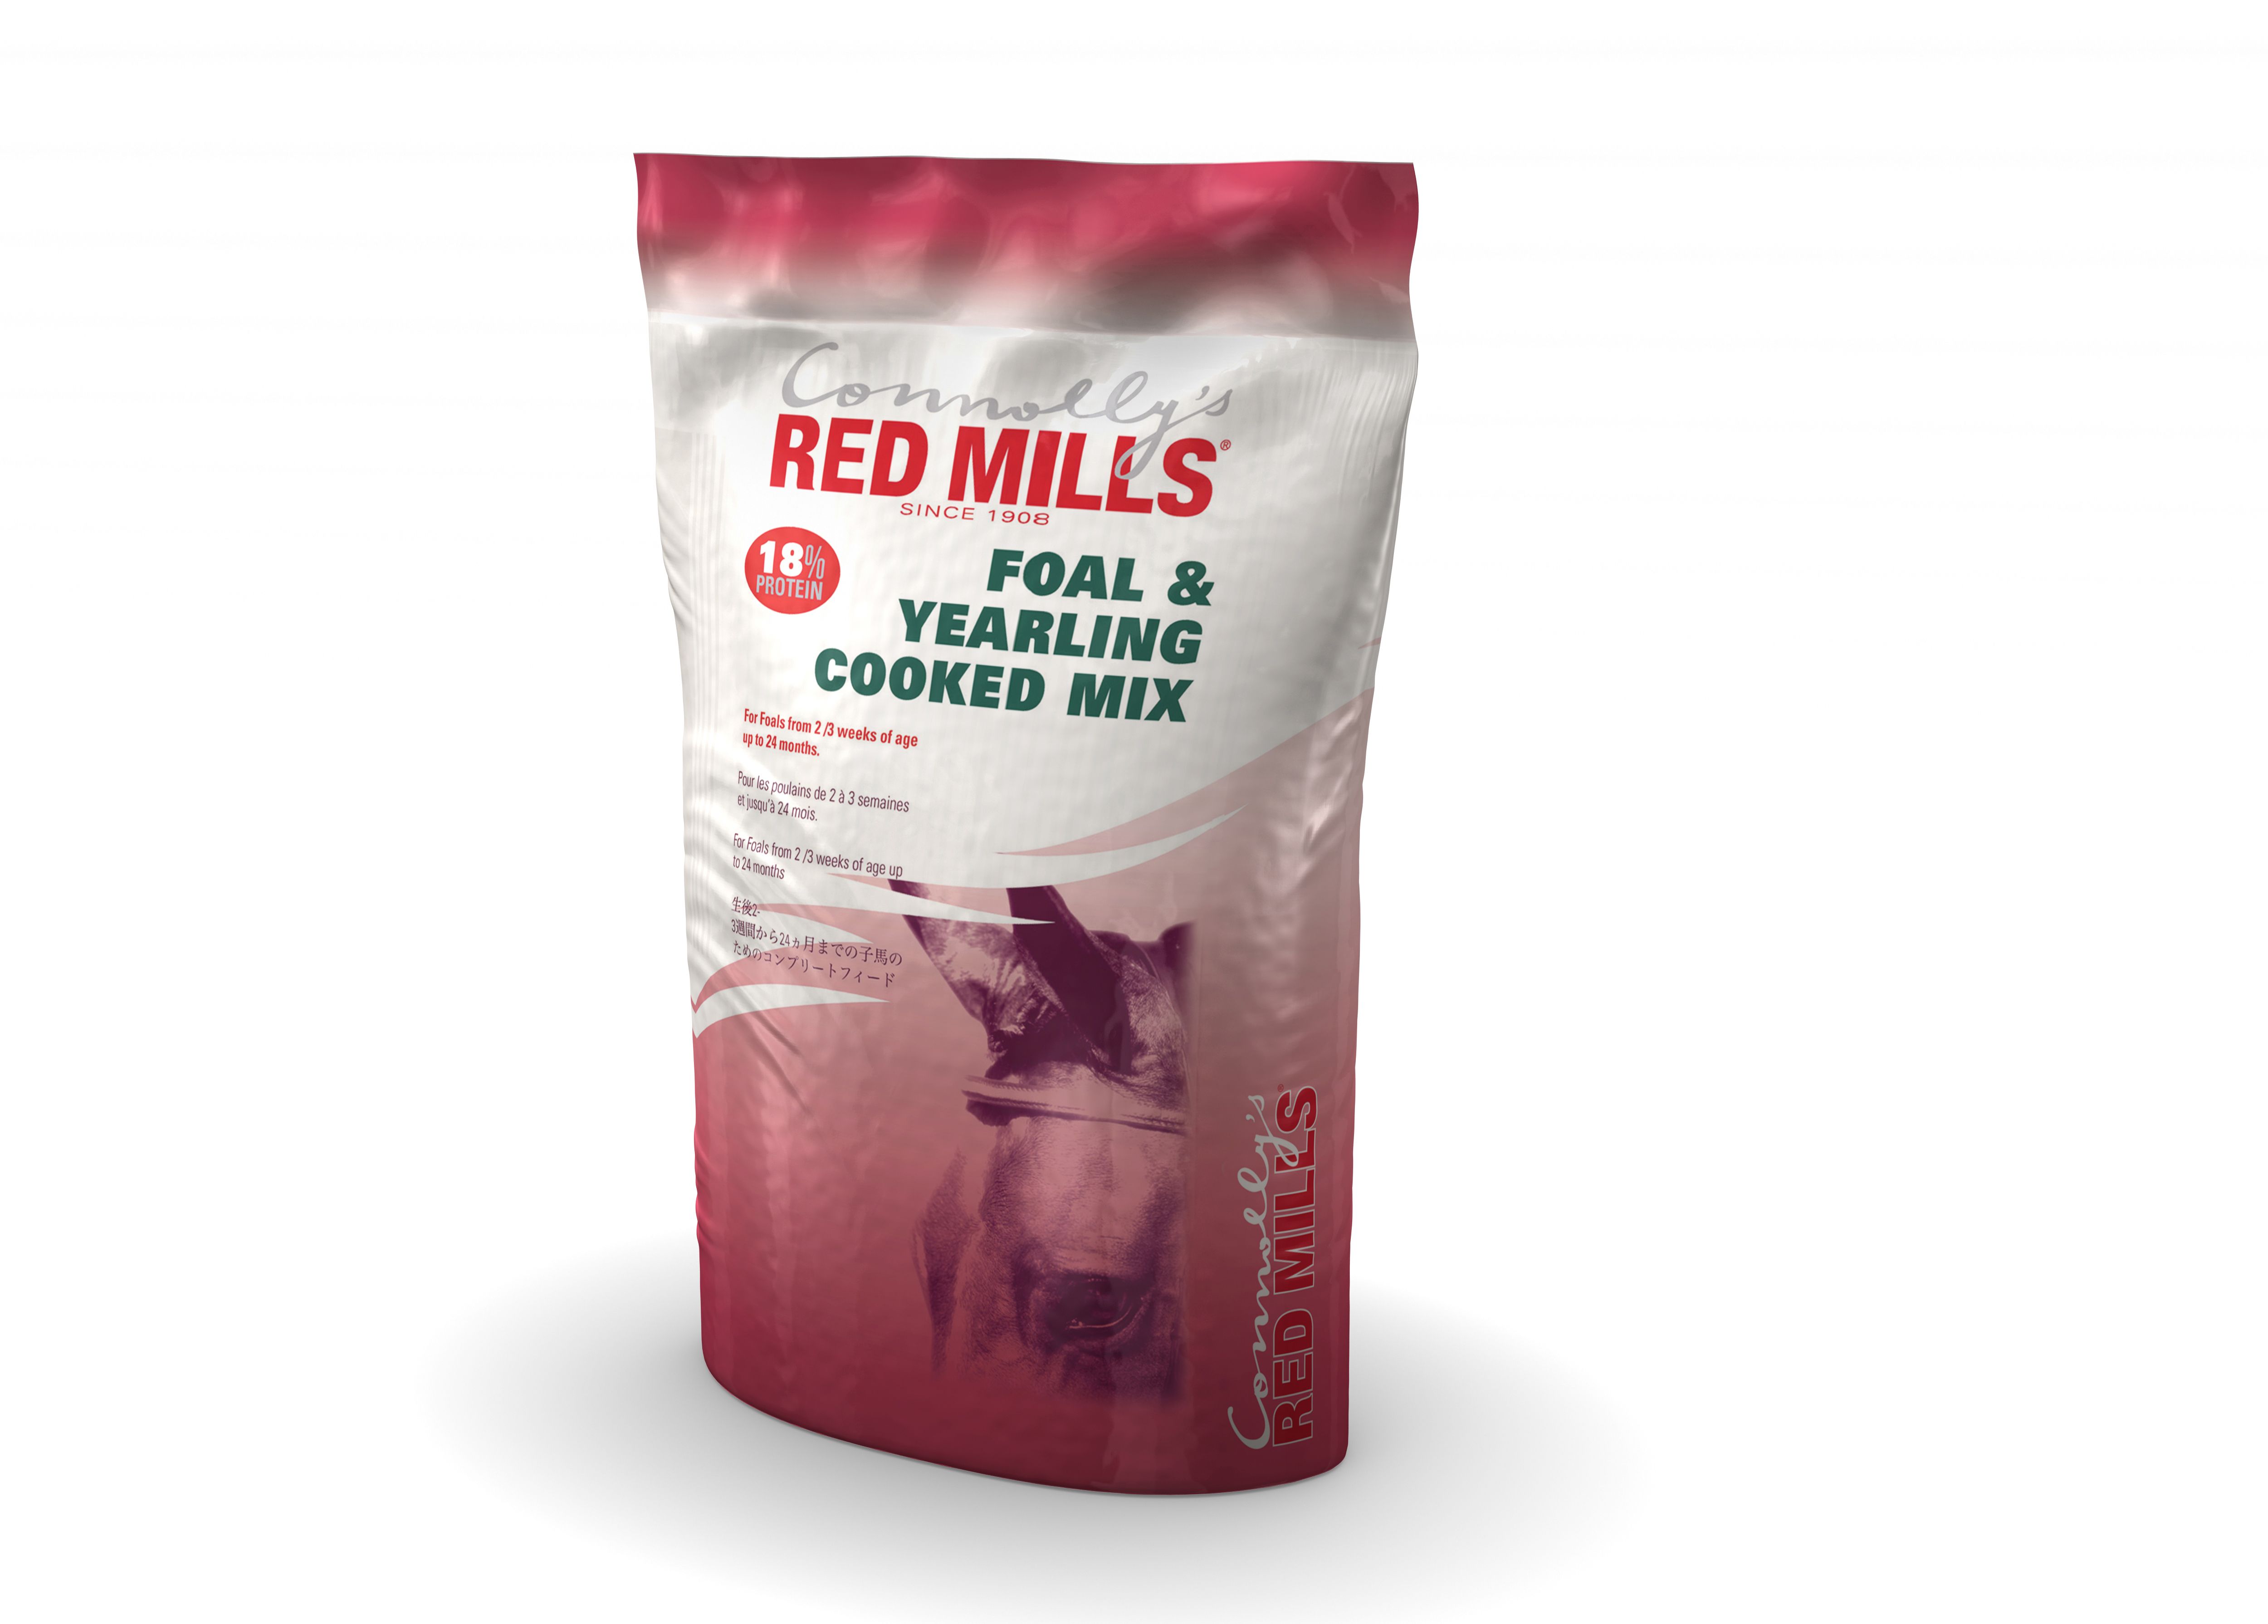 Red Mills Foal & Yearling Cooked Mix 18%